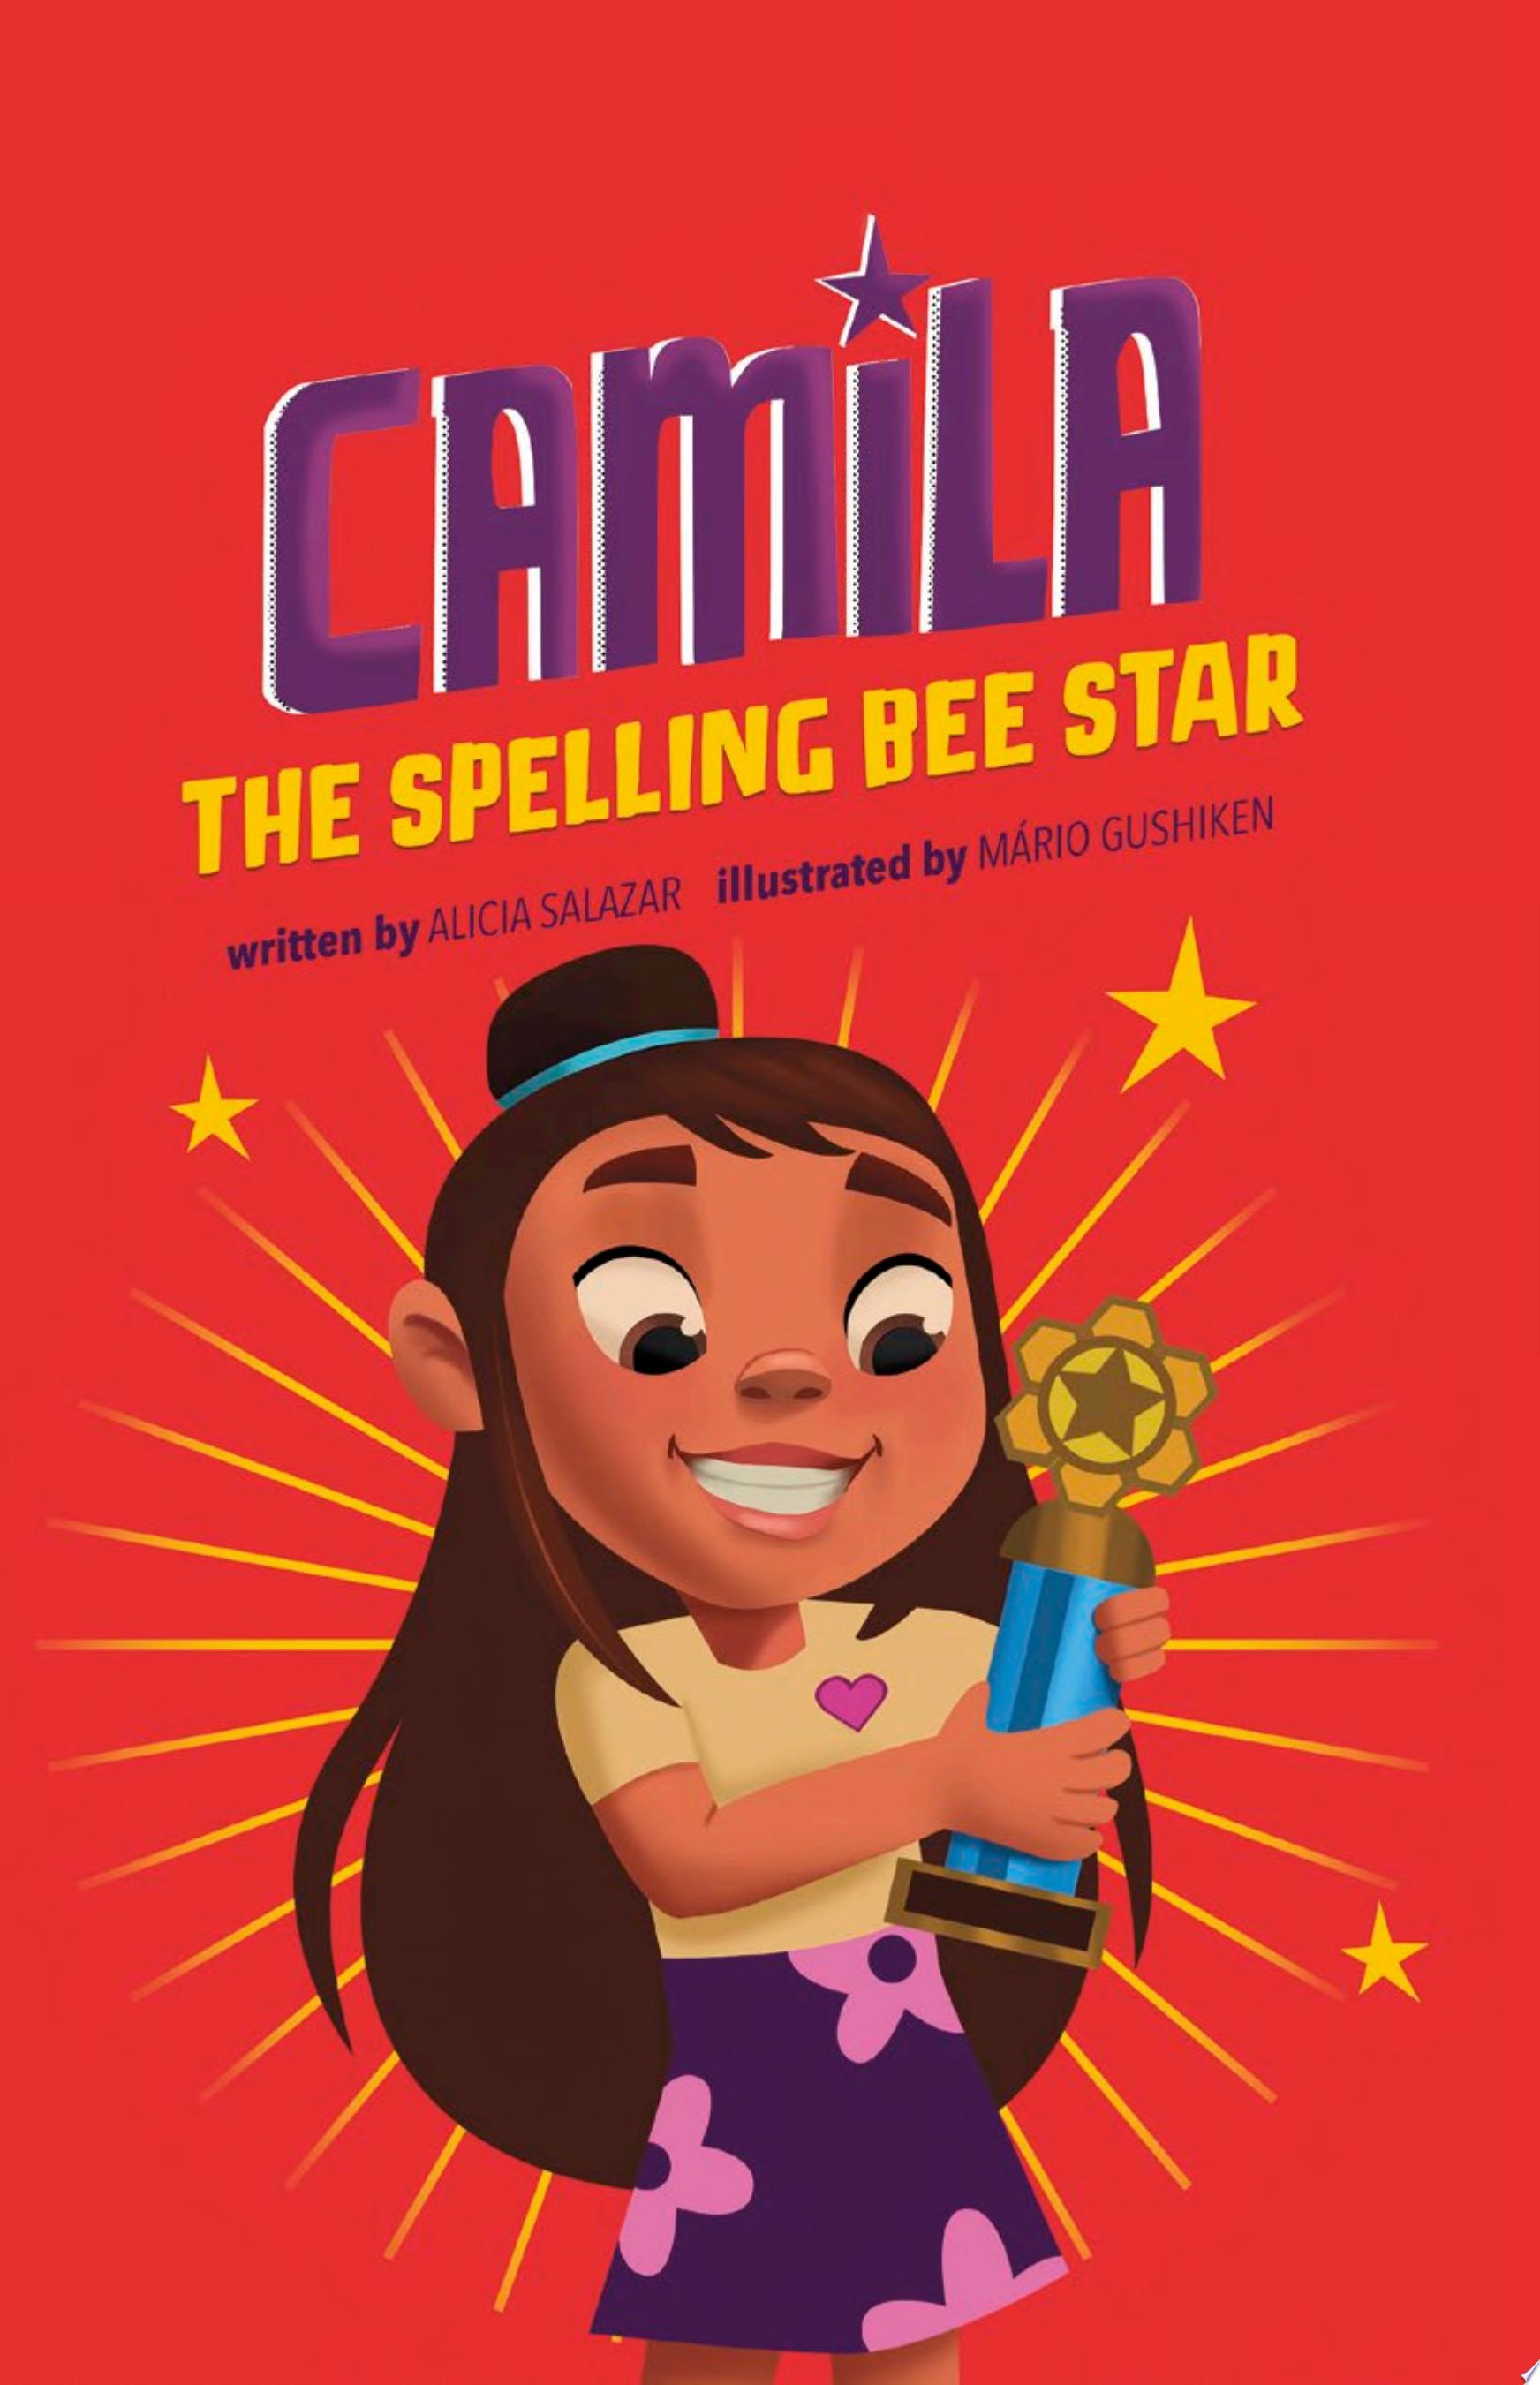 Image for "Camila the Spelling Bee Star"